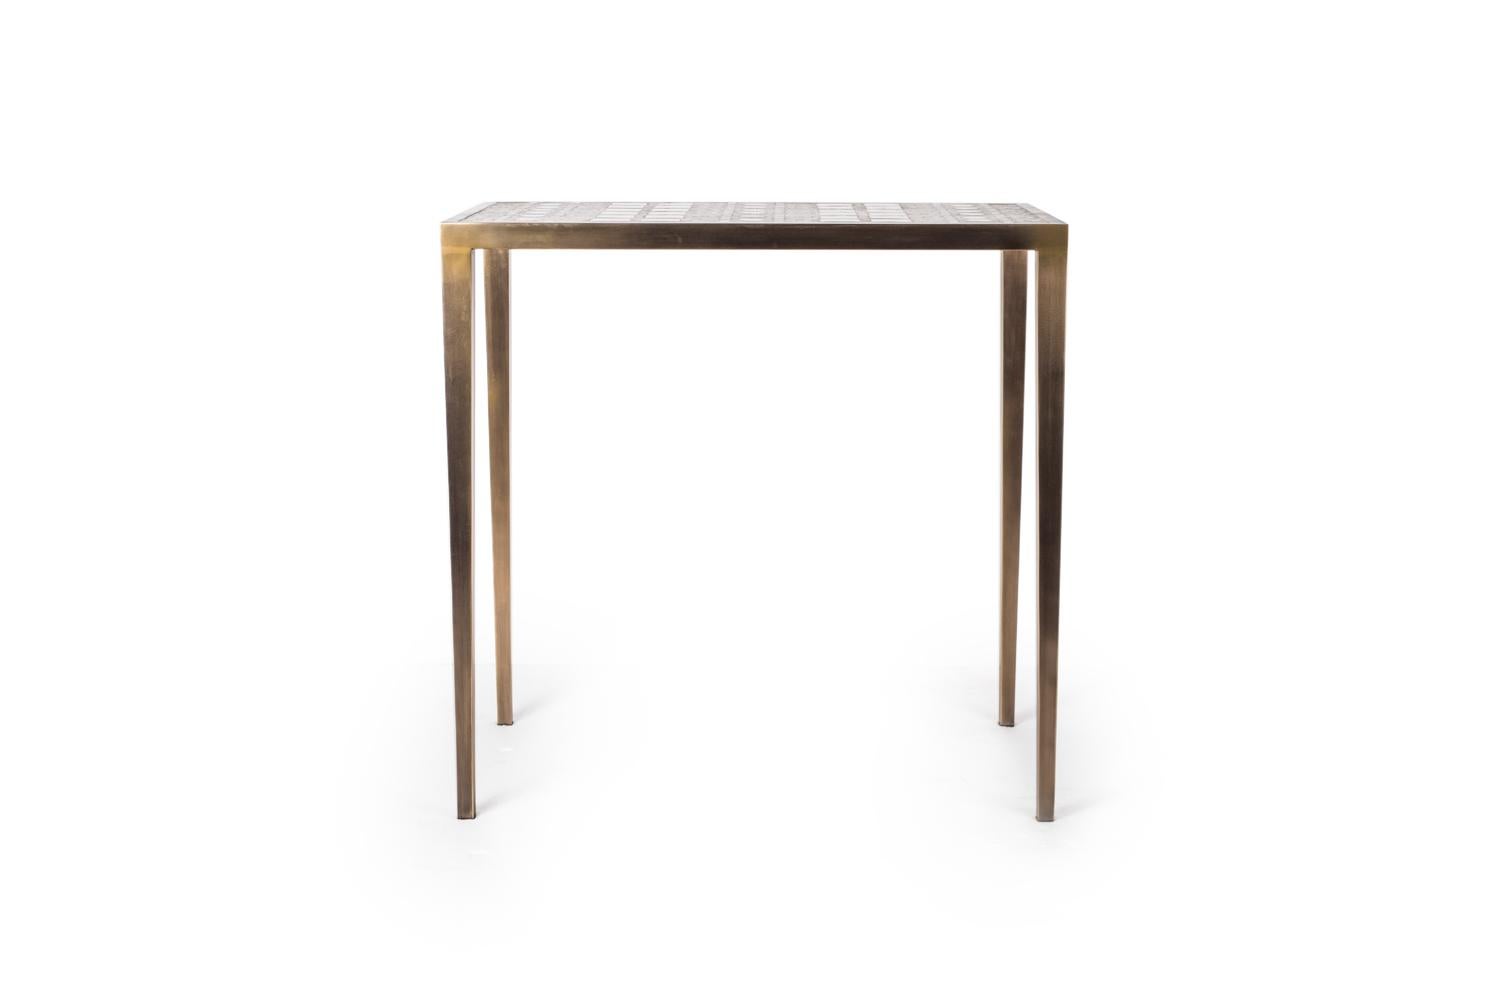 The mix media nesting side table in large is part of a series of nesting side tables (sold separately) . One can purchase the tables on their own or buy them as a set to create elegant & geometric shapes. This piece demonstrates the incredible